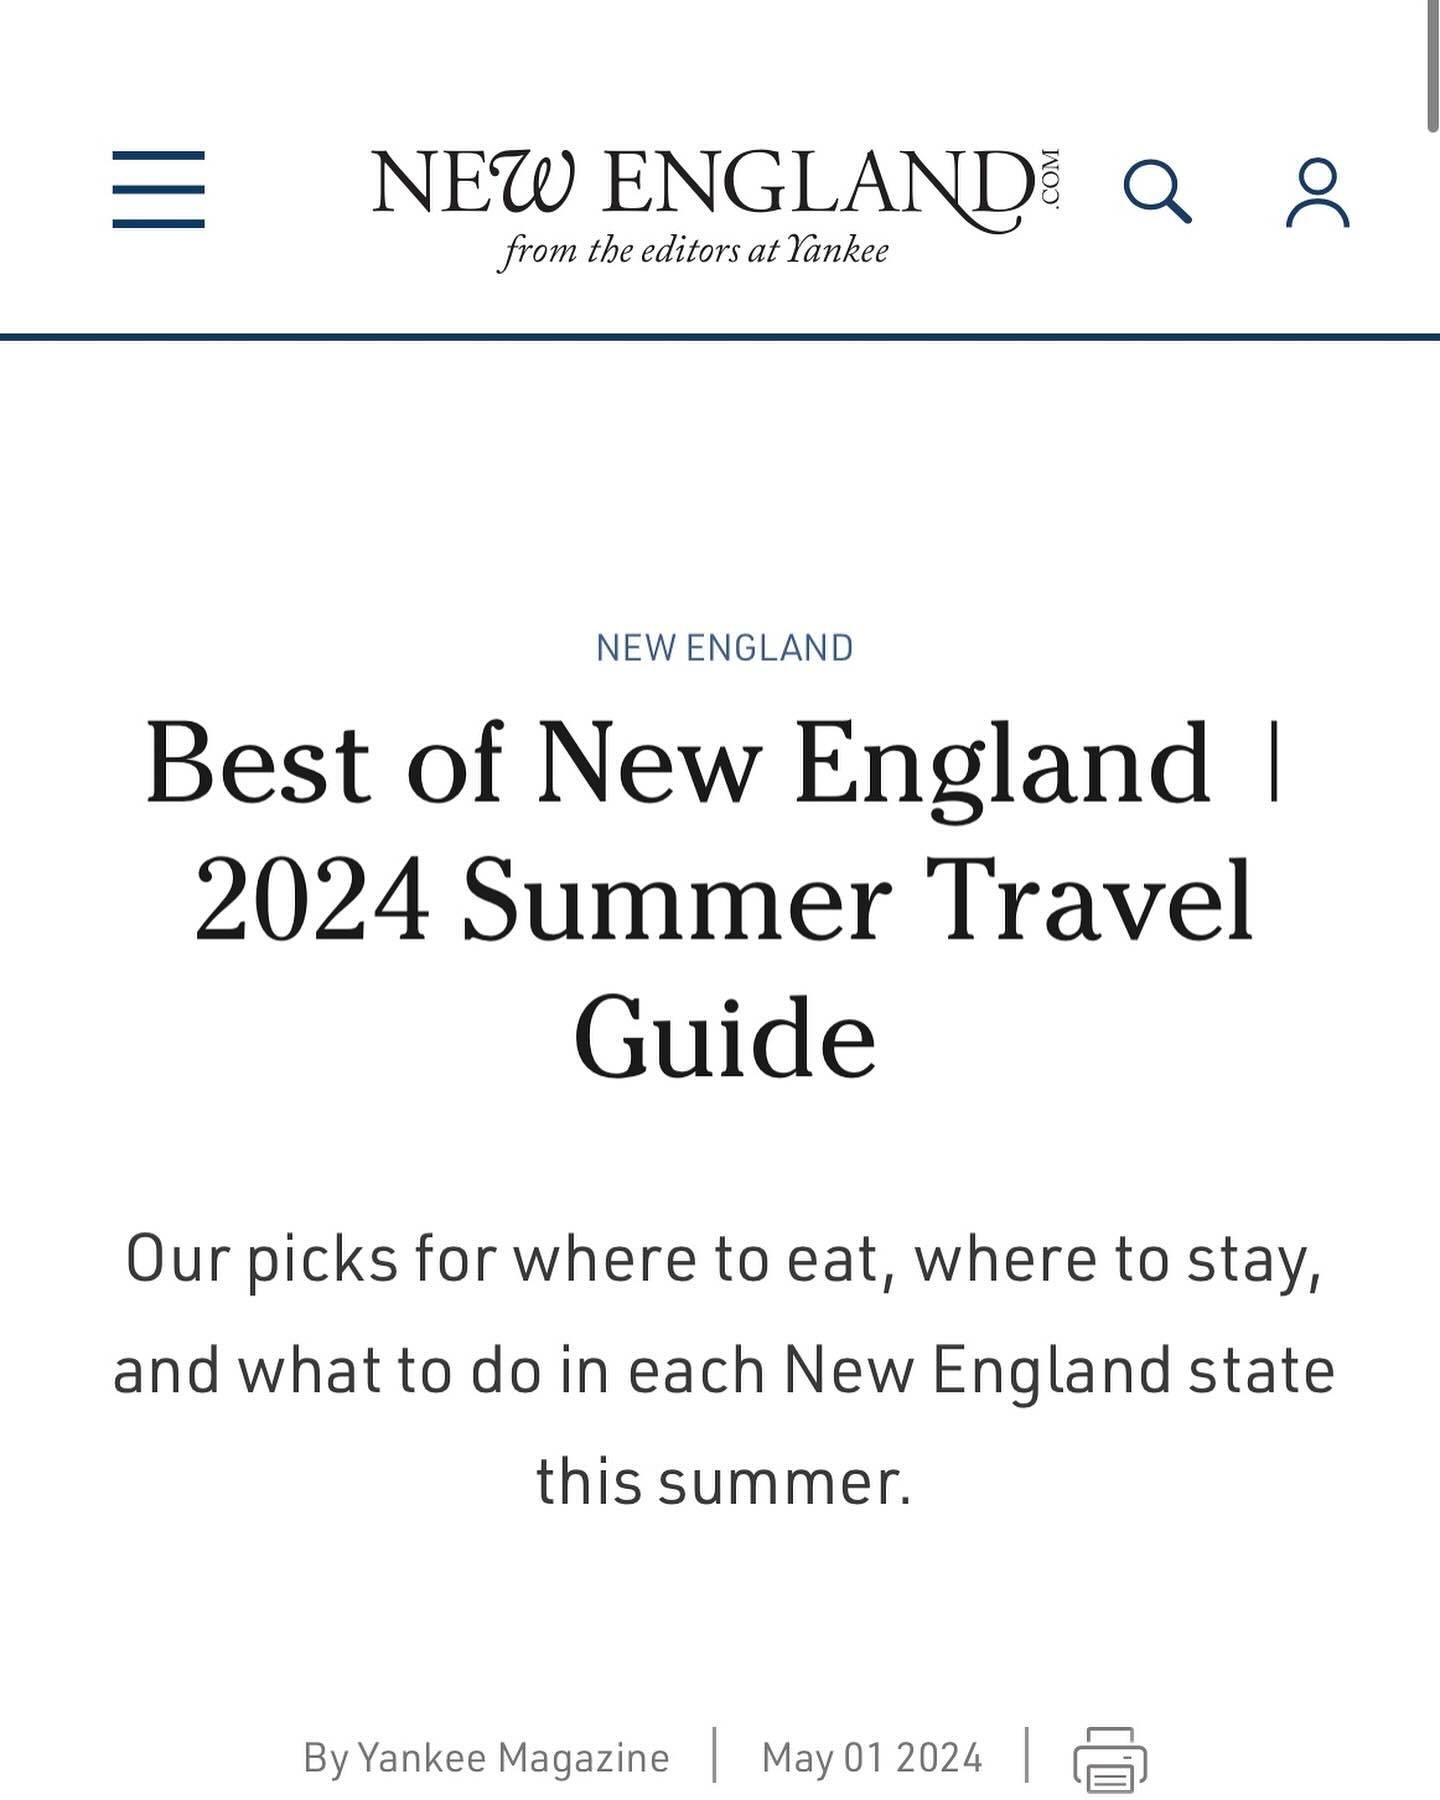 Honored to be featured in the @yankeemagazine 2024 summer travel guide as a classic VT Inn! We work hard to make sure all our guests enjoy their time here, and it&rsquo;s always nice to be recognized. We&rsquo;d only make one edit to the blurb&mdash;